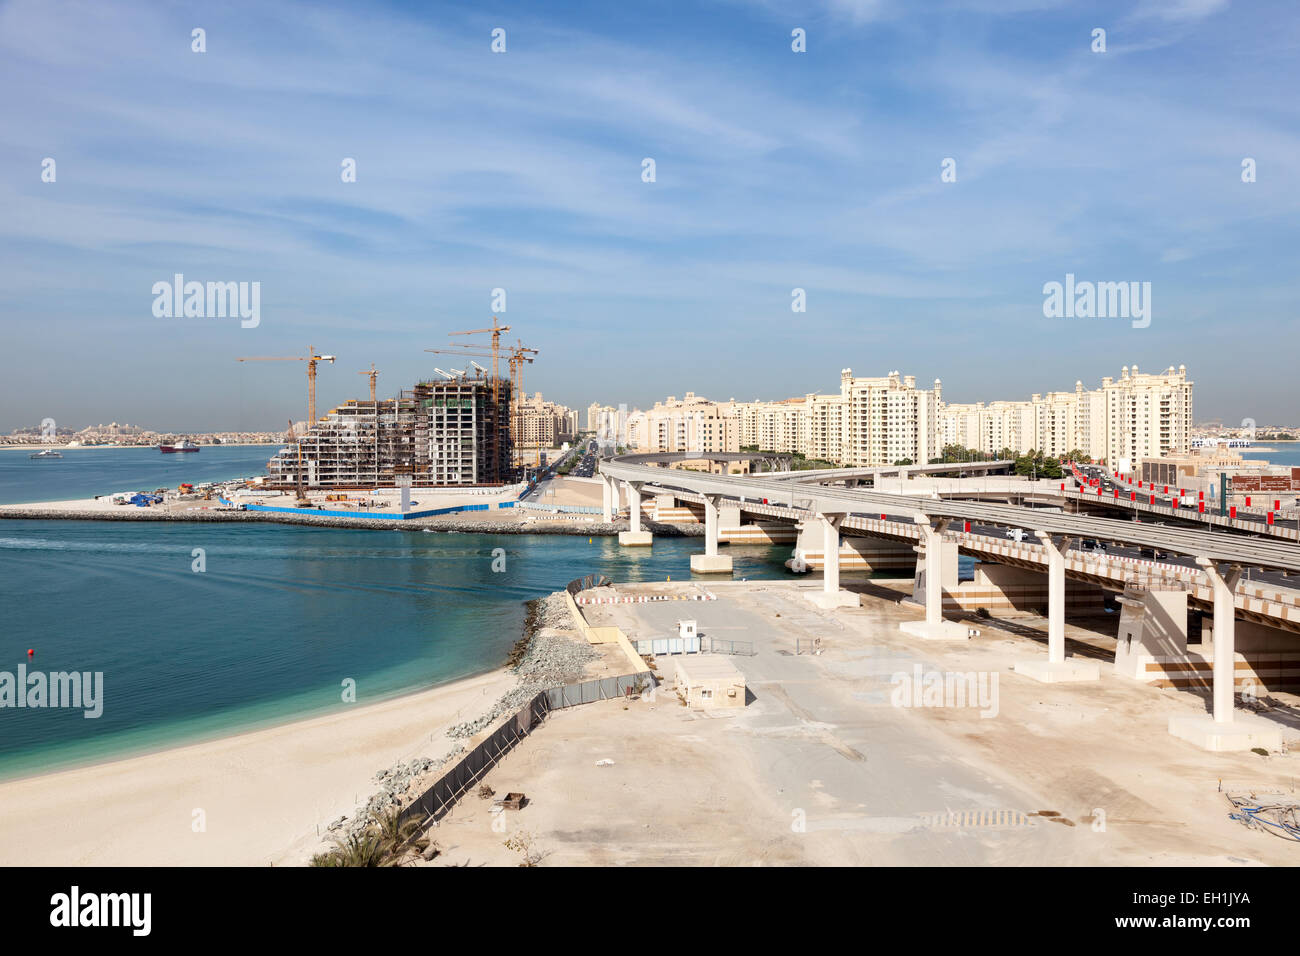 Palm Jumeirah highway, monorail and bridges connecting the Palm with mainland. Dubai, United Arab Emirates Stock Photo